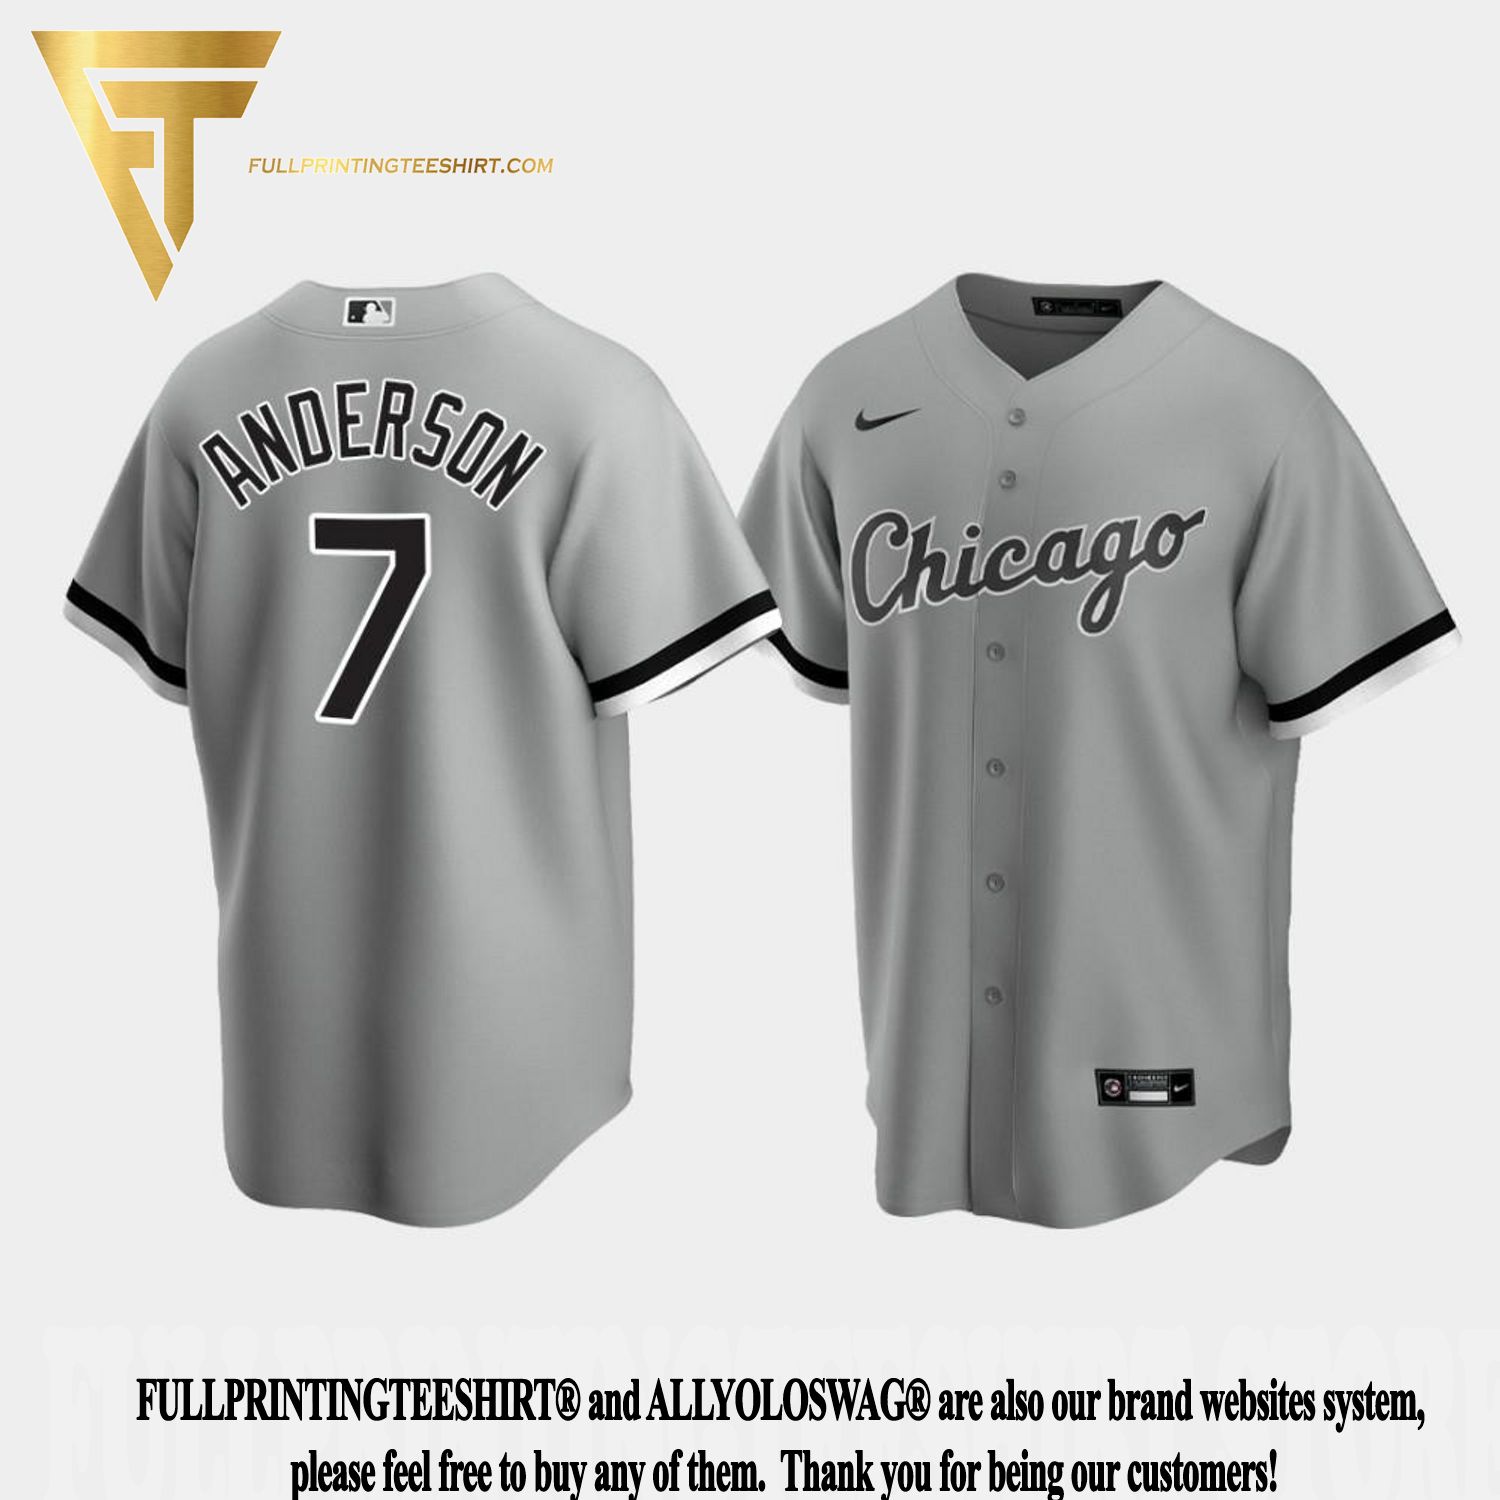 2022 Tim Anderson White Sox All Star Nike Authentic Jersey. Even